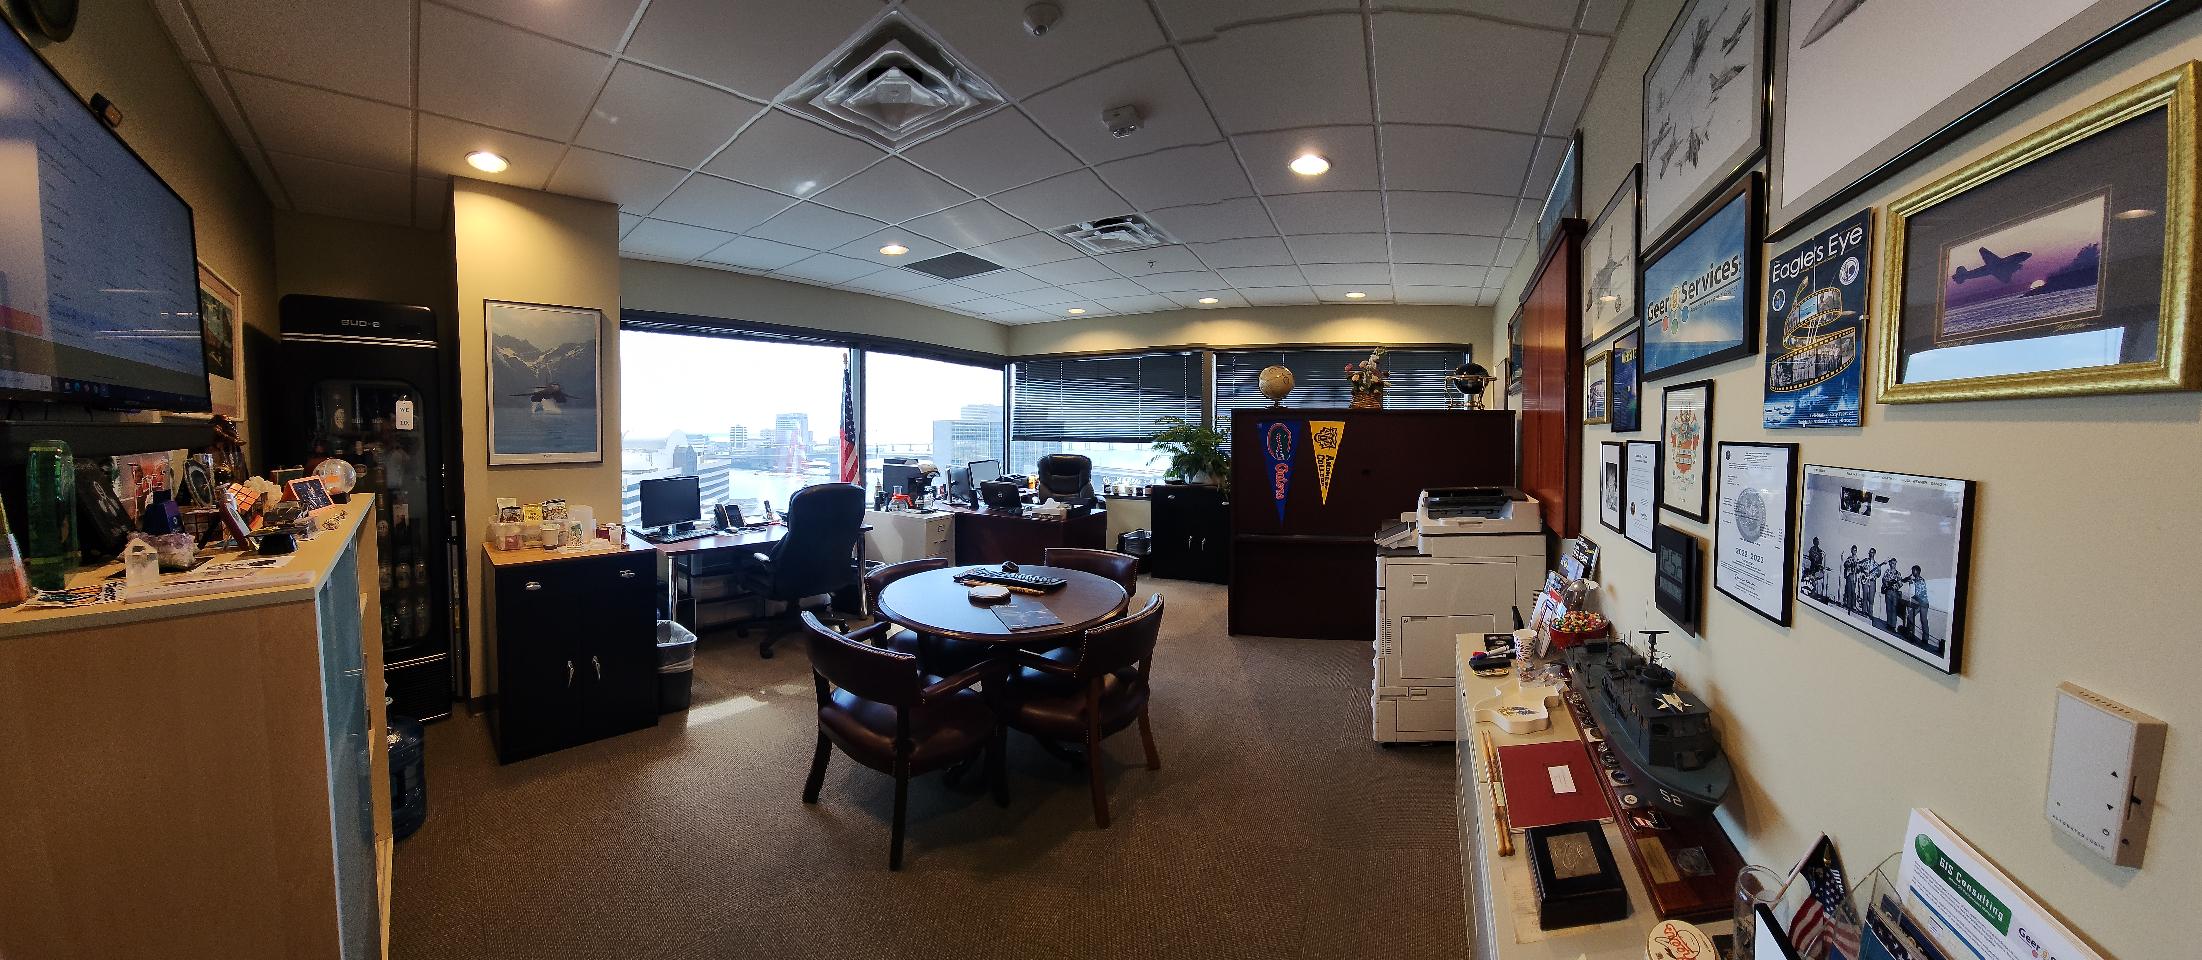 Geer Services Office Jacksonville